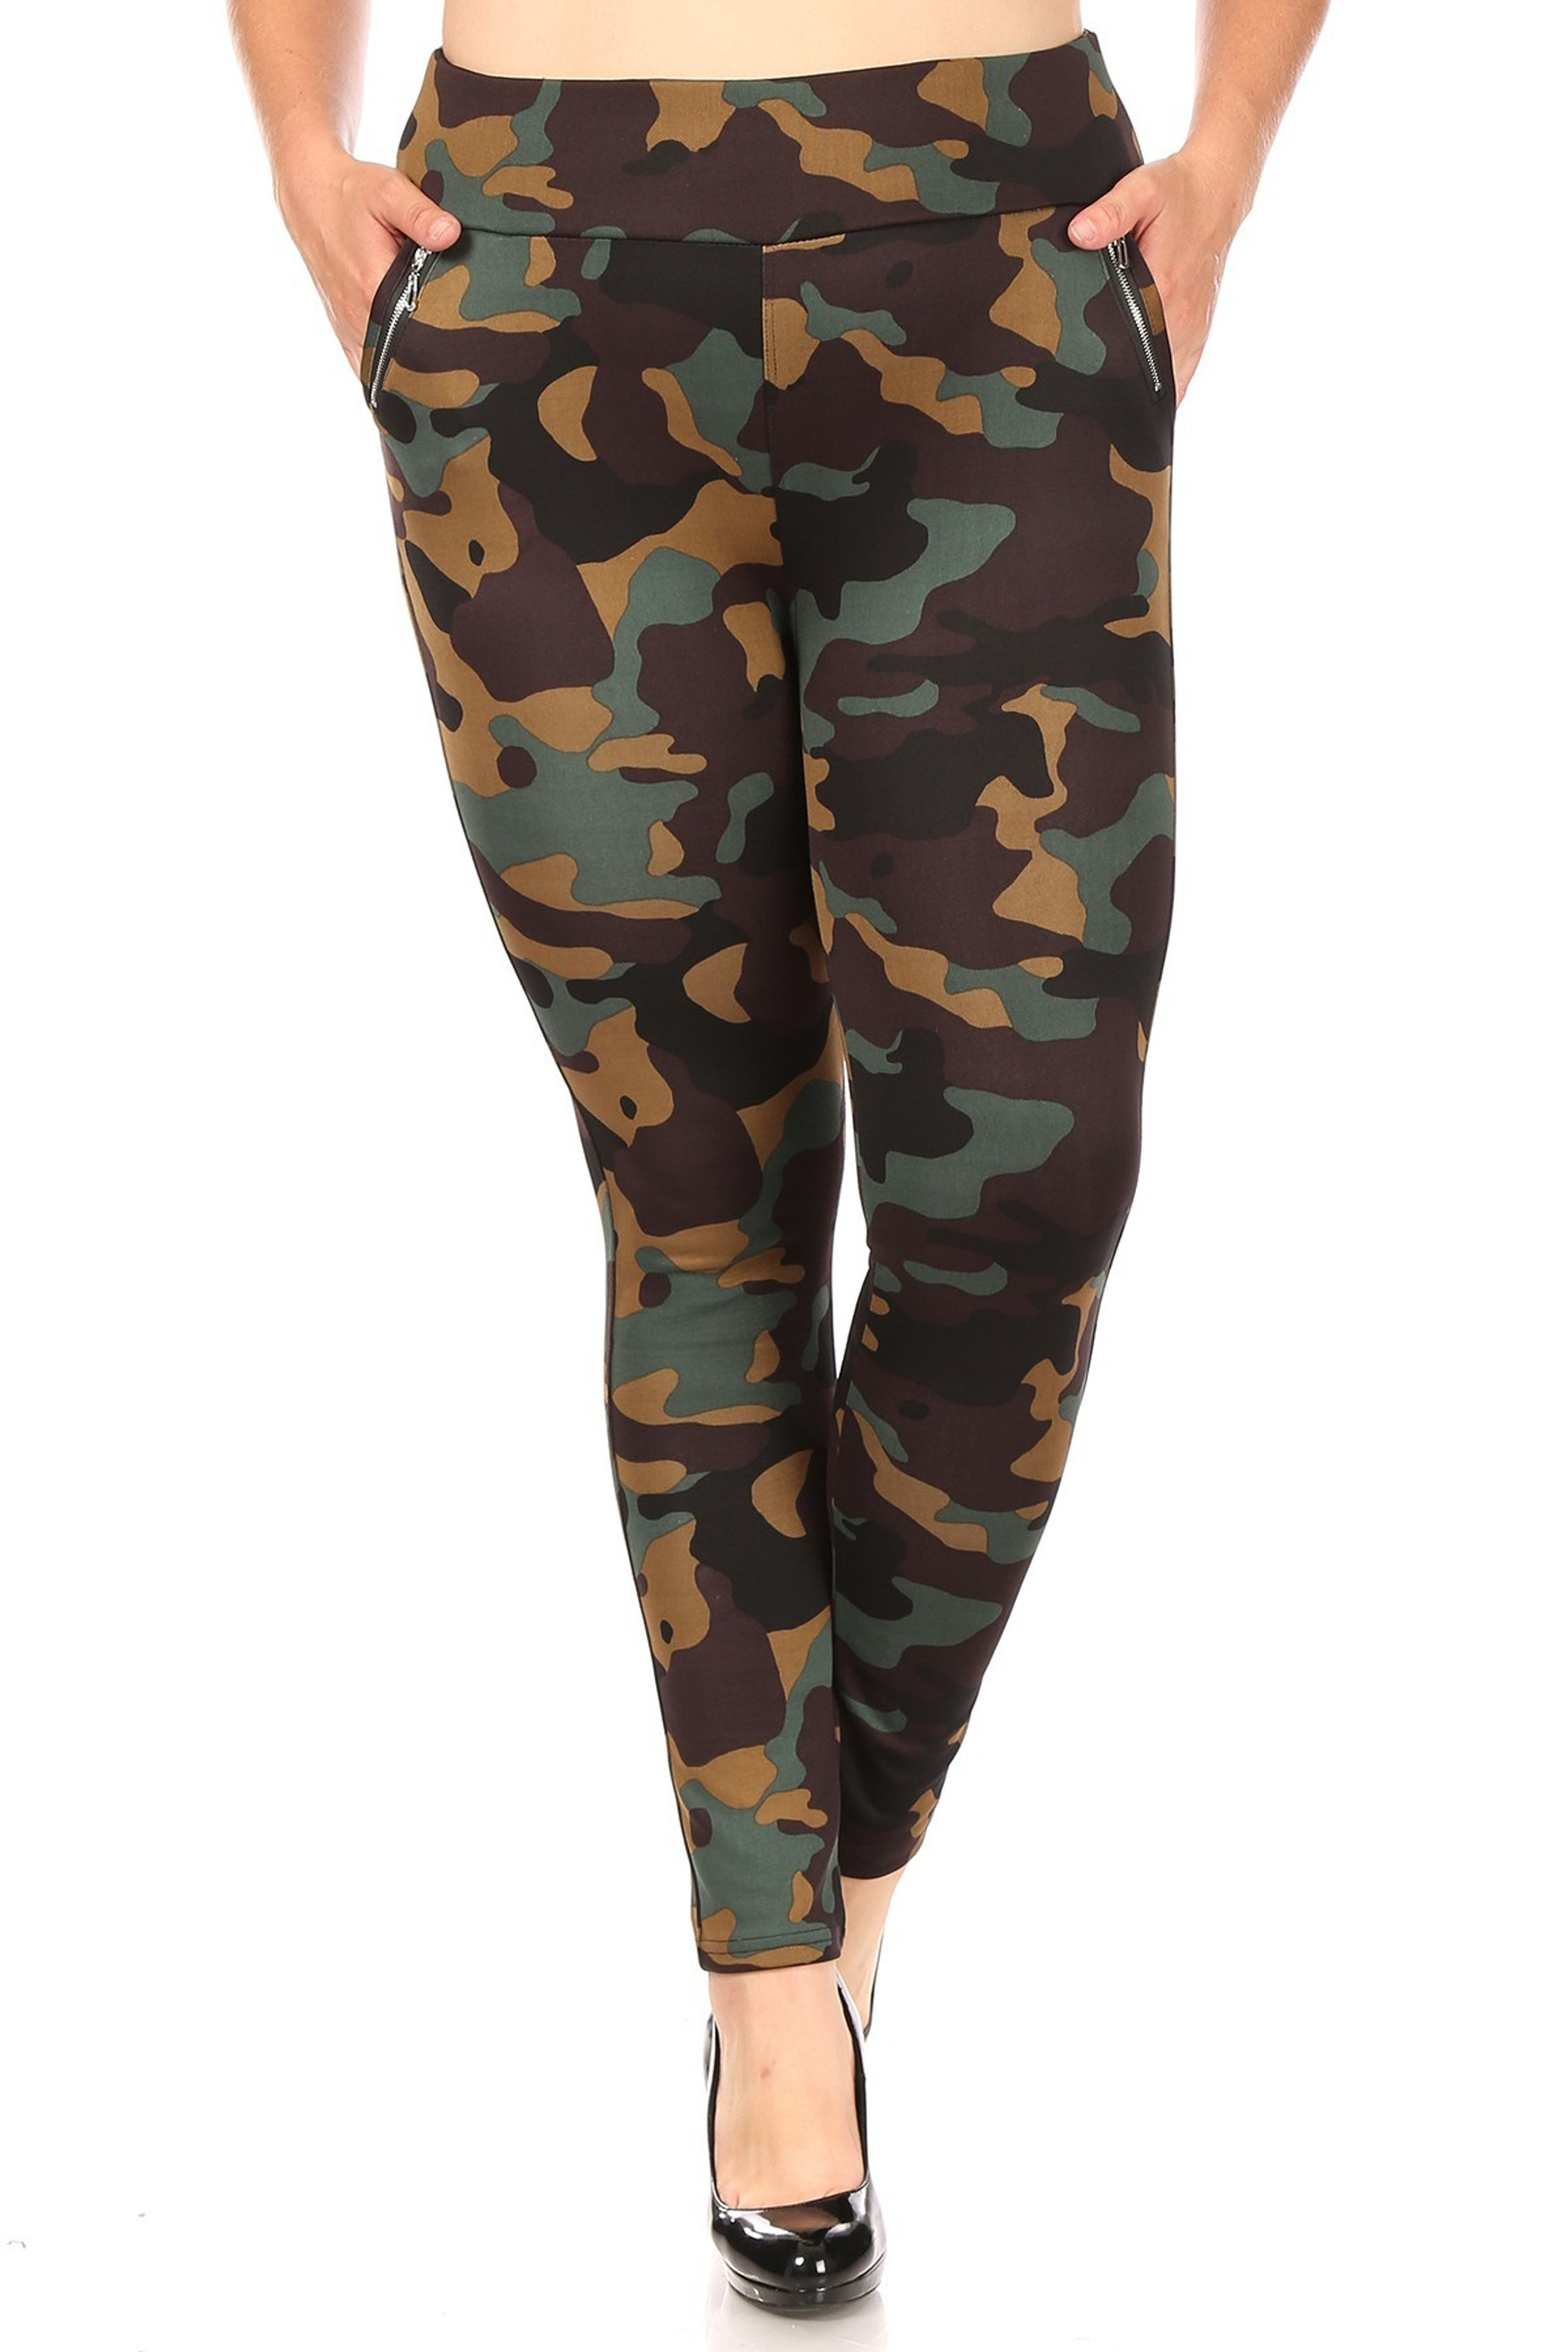 Brown Camouflage High Waisted Plus Size Treggings with Zipper Accent Pockets